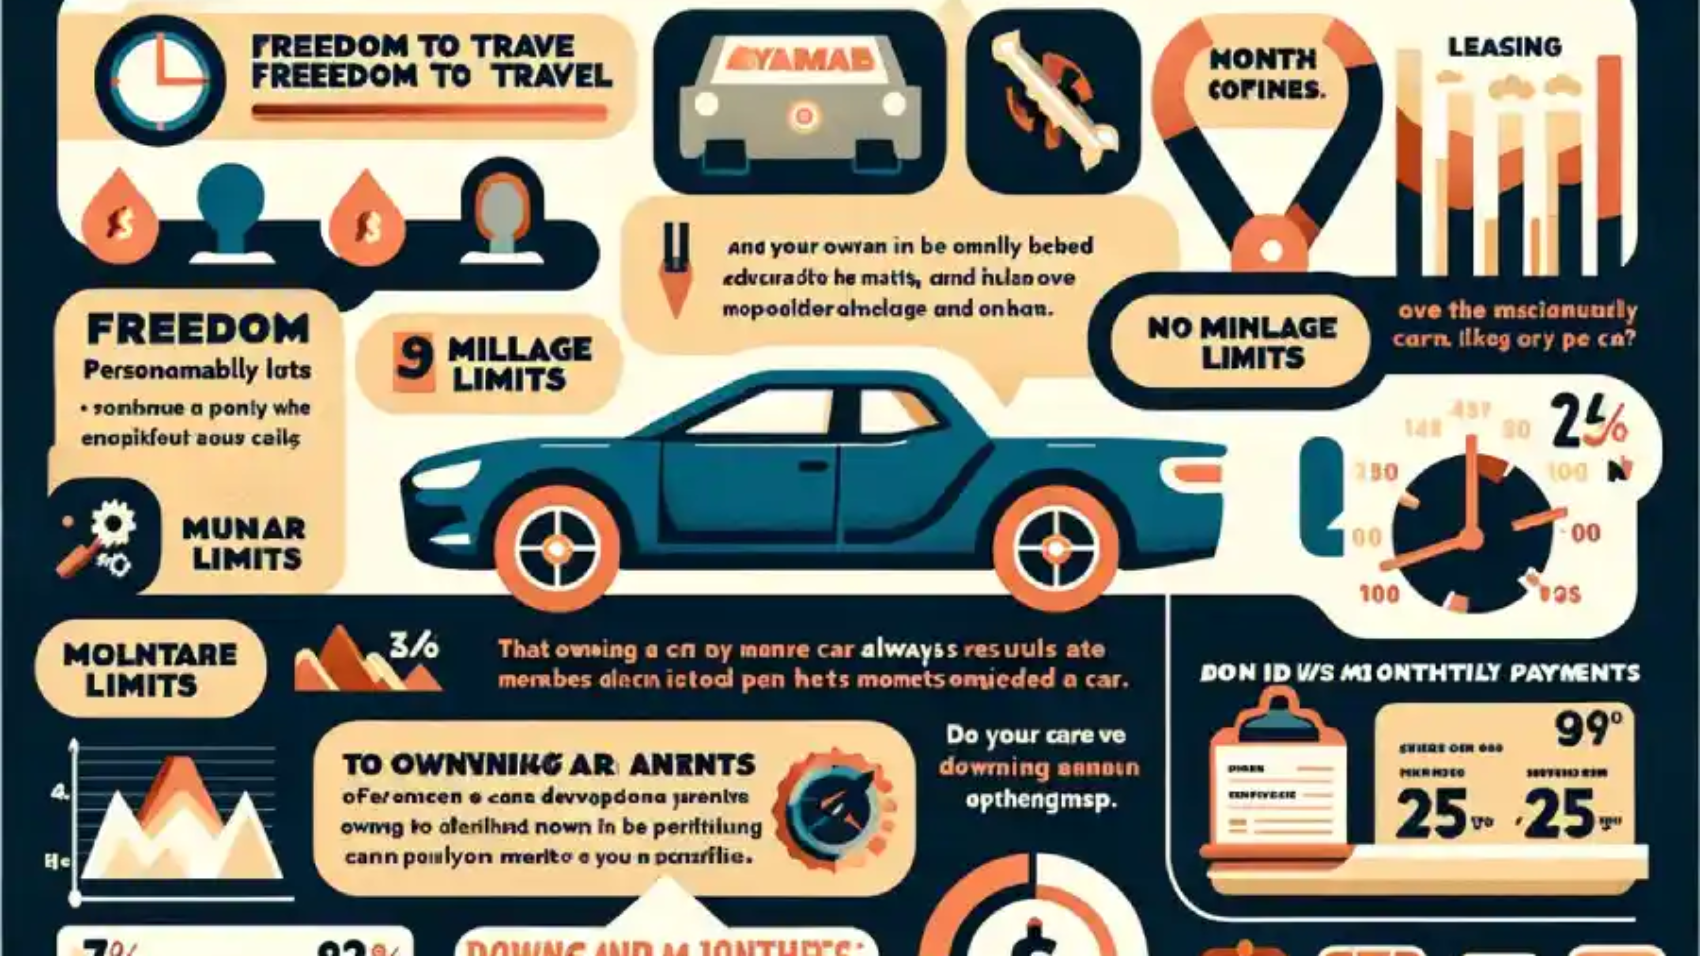 Which of the following is NOT an advantage of owning a car?